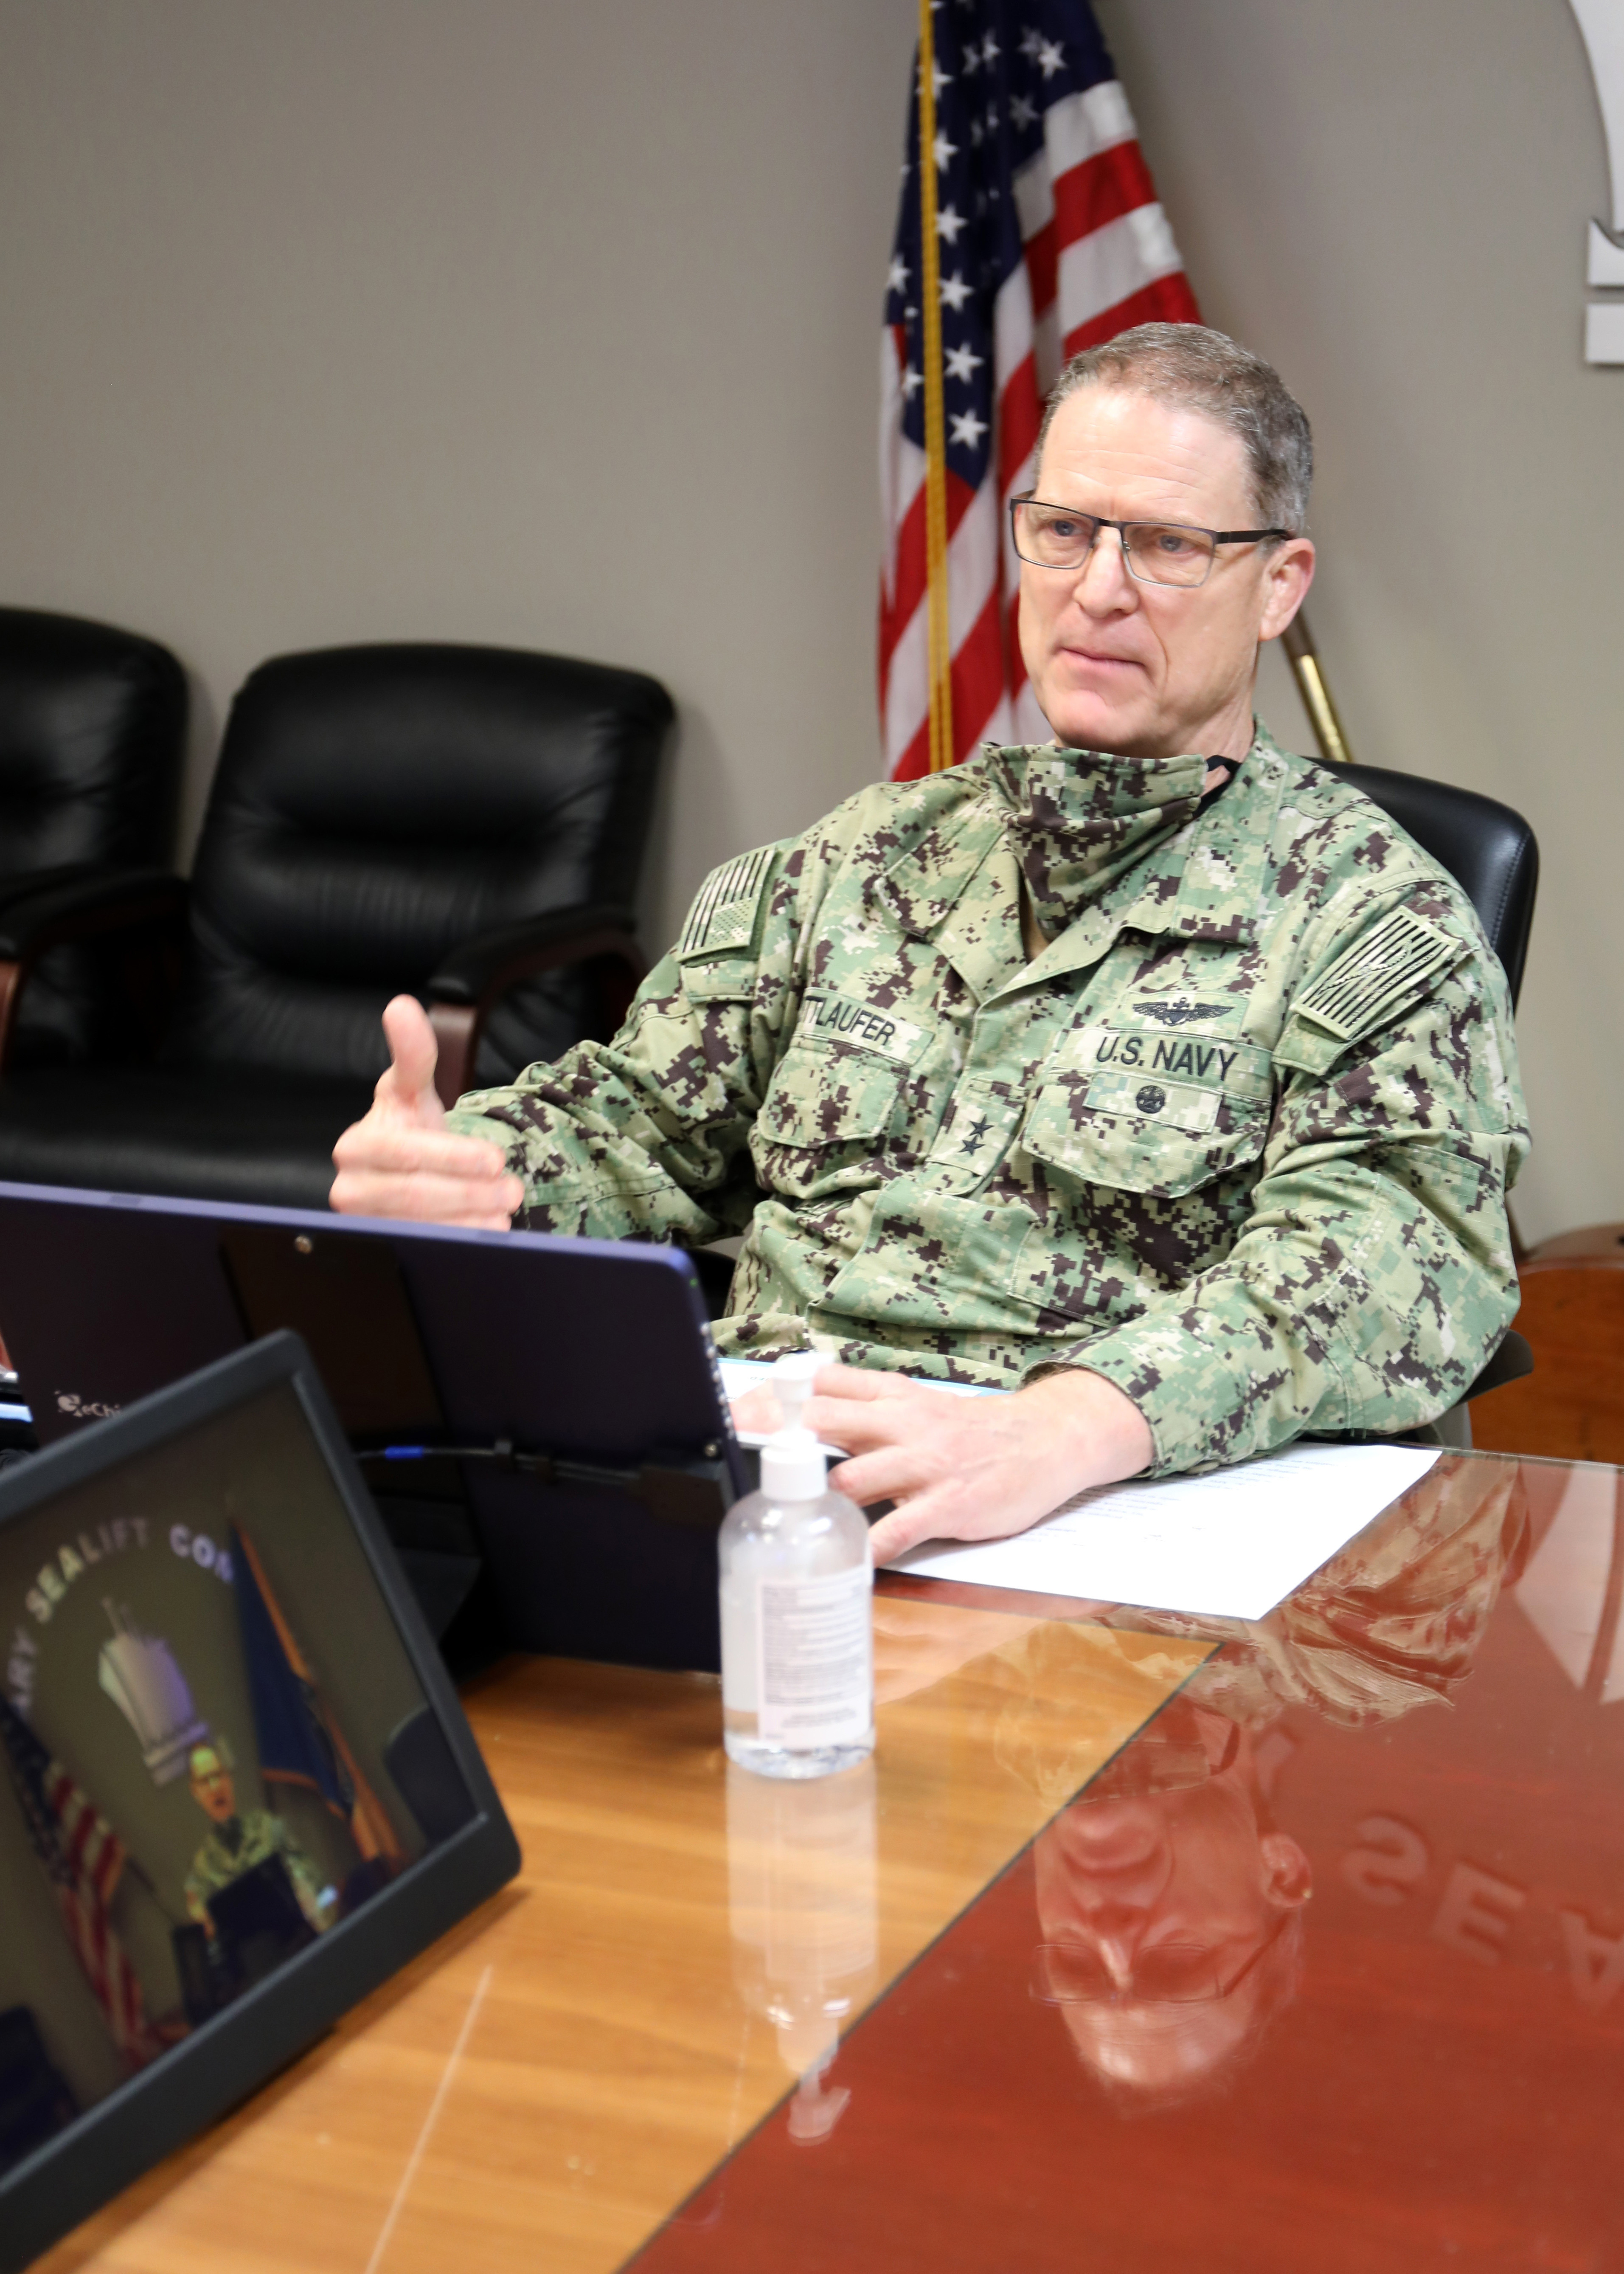 Rear Adm. Michael Wettlaufer, Commander, Military Sealift Command, addresses prospective small business and industry partners during the command's Virtual Small Business Industry Day, Oct. 22